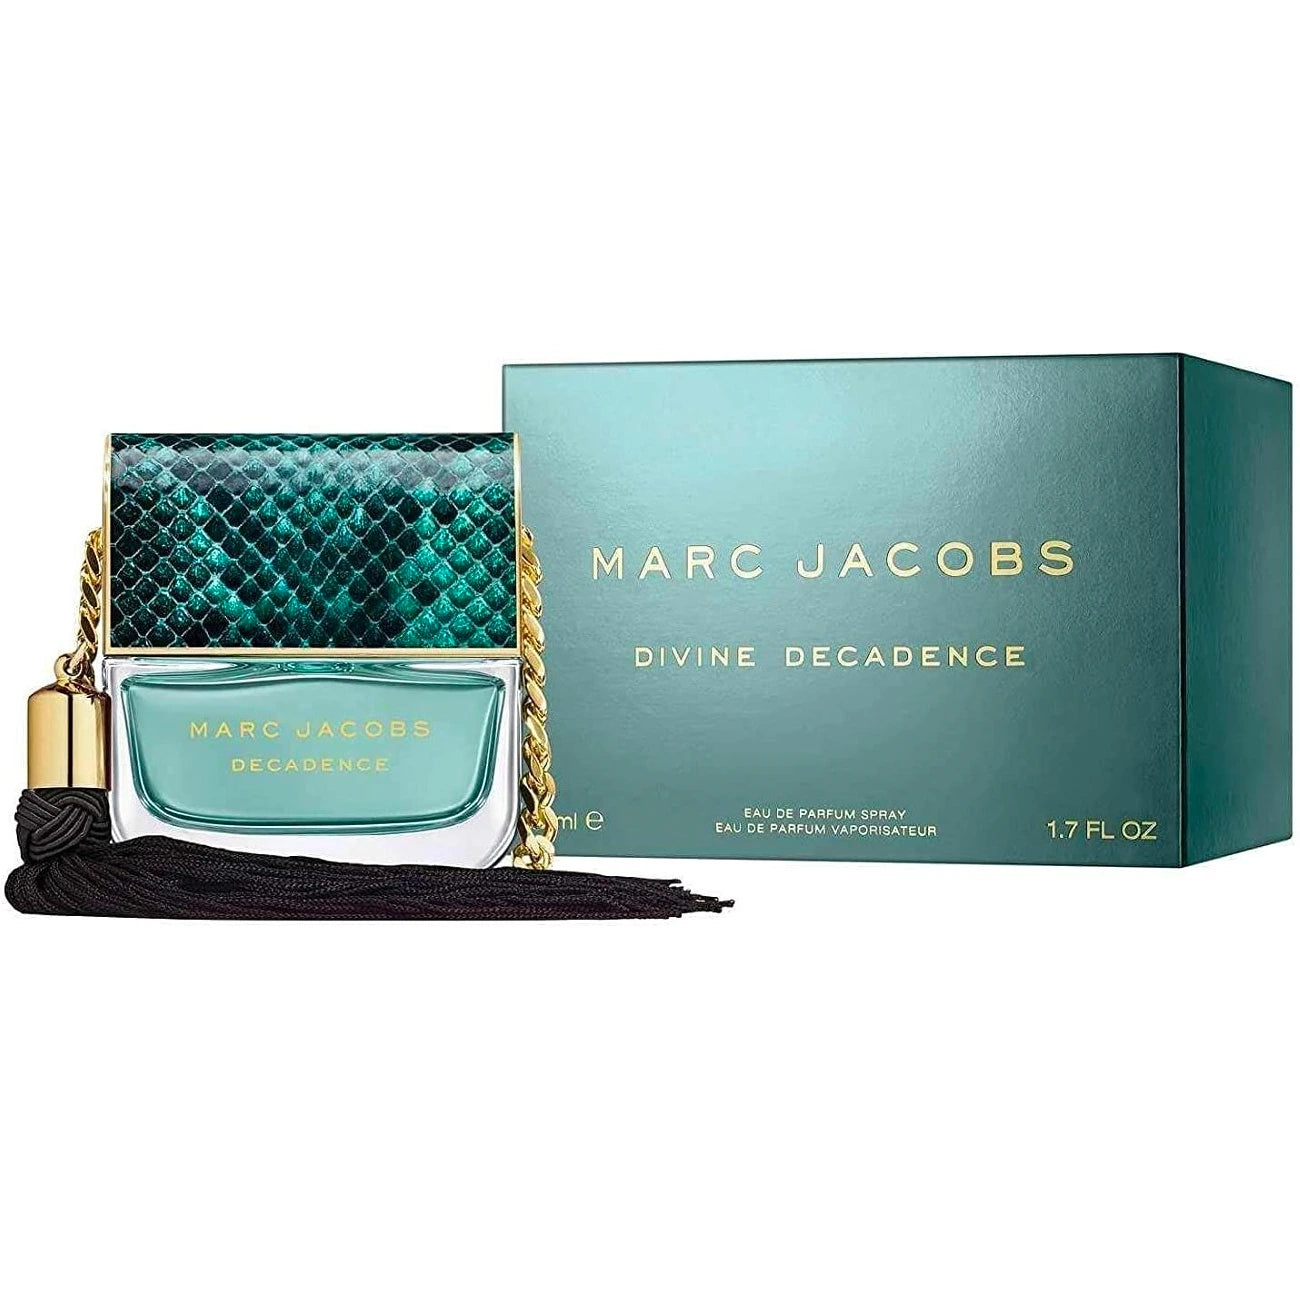 <b data-mce-fragment="1">Divine Decadence</b><span data-mce-fragment="1"> by </span><b data-mce-fragment="1">Marc Jacobs</b><span data-mce-fragment="1"> is a Amber Floral fragrance for women. </span><b data-mce-fragment="1">Divine Decadence</b><span data-mce-fragment="1"> was launched in 2016. Top notes are Champagne, Orange Blossom and Bergamot; middle notes are Honeysuckle, Hortensia and Gardenia; base notes are Vanilla, Saffron and Amber.</span>